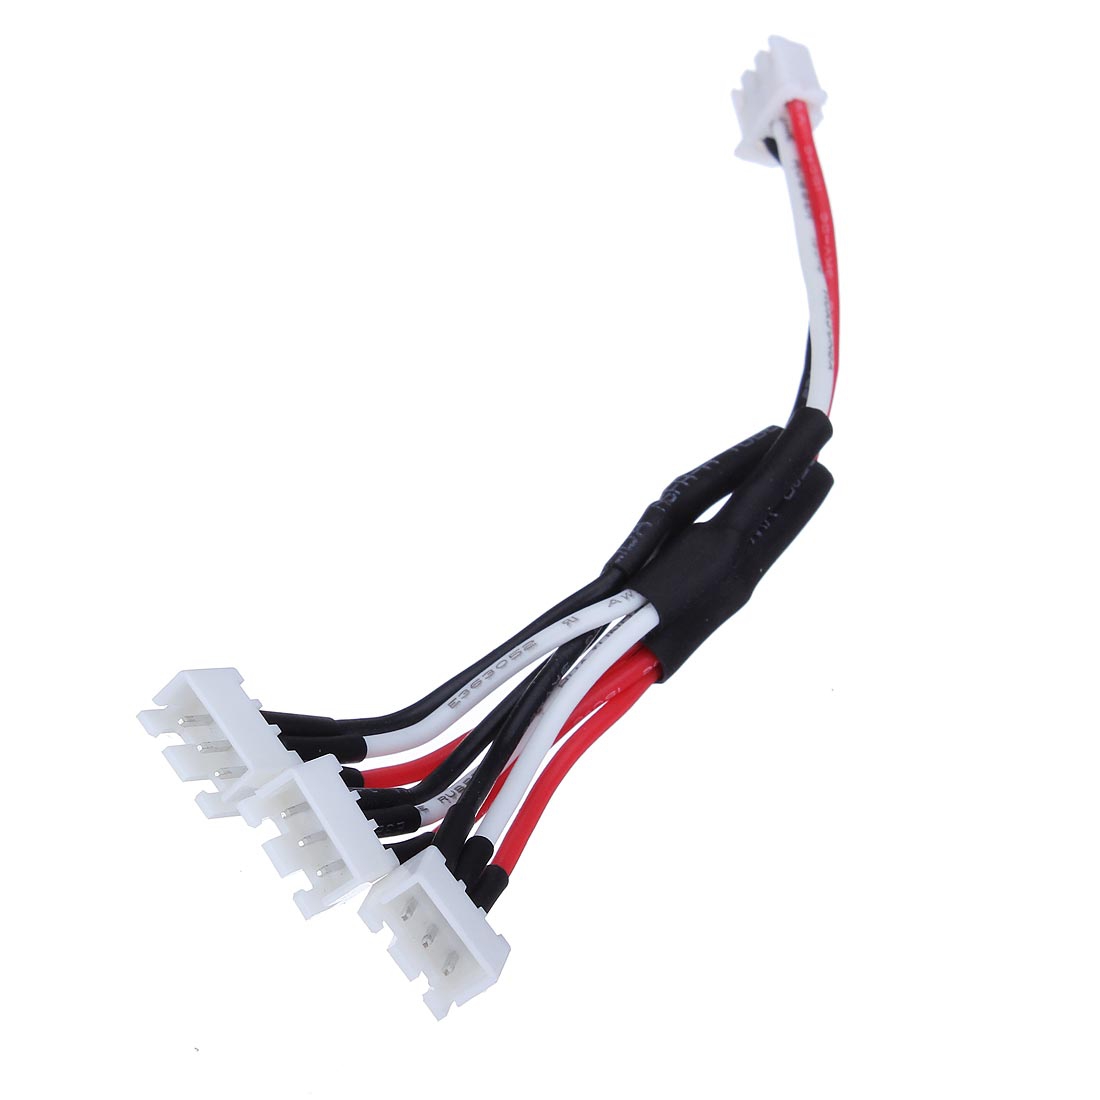 1 to 3 Balance Charging Cable for RC Quadcopter Airplane Cars Boats 